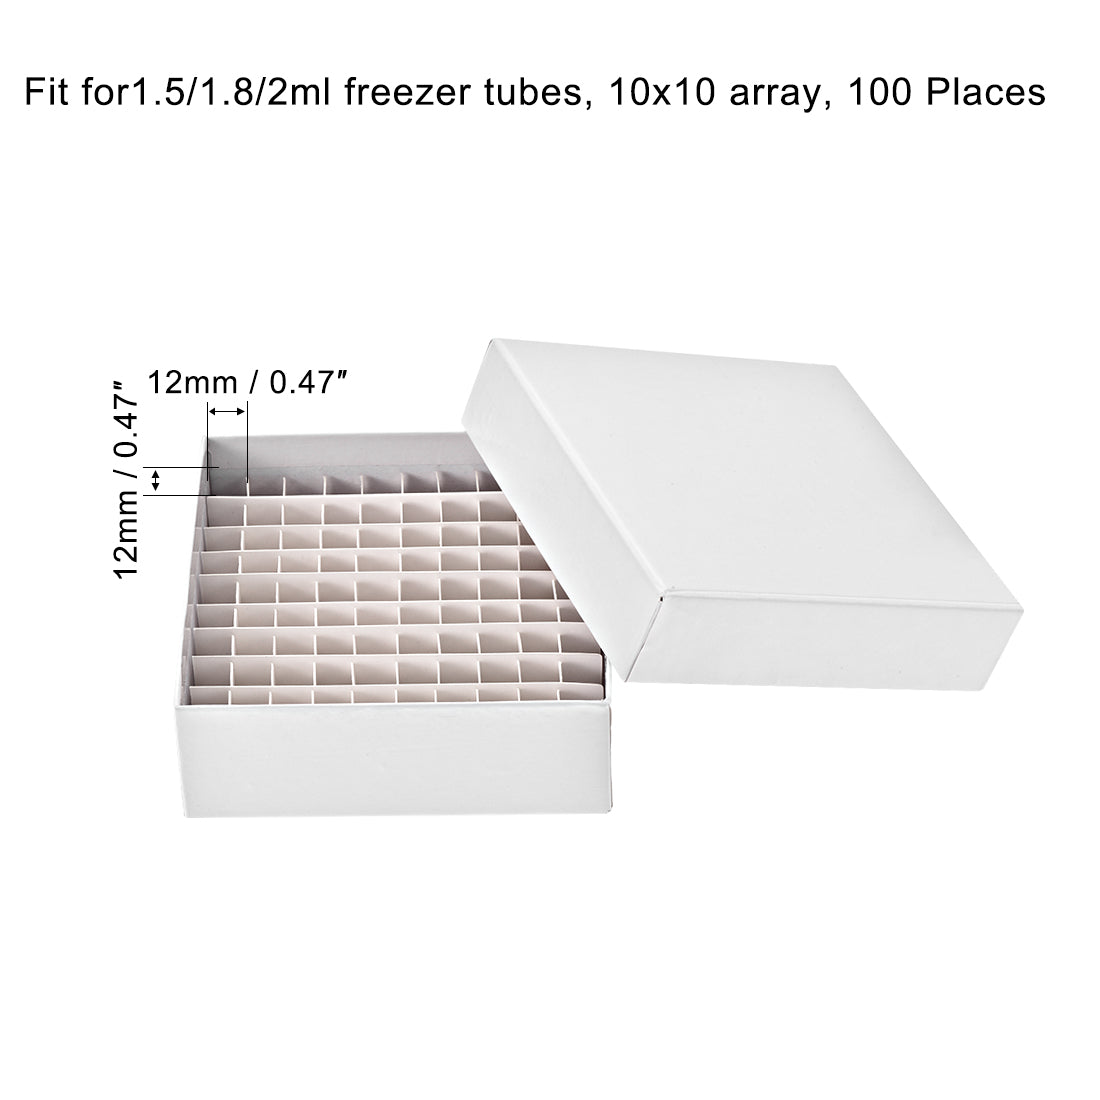 Uxcell Uxcell Freezer Tube Box 100 Places Waterproof Cardboard Holder Rack for 1.5/1.8/2ml Microcentrifuge Tubes